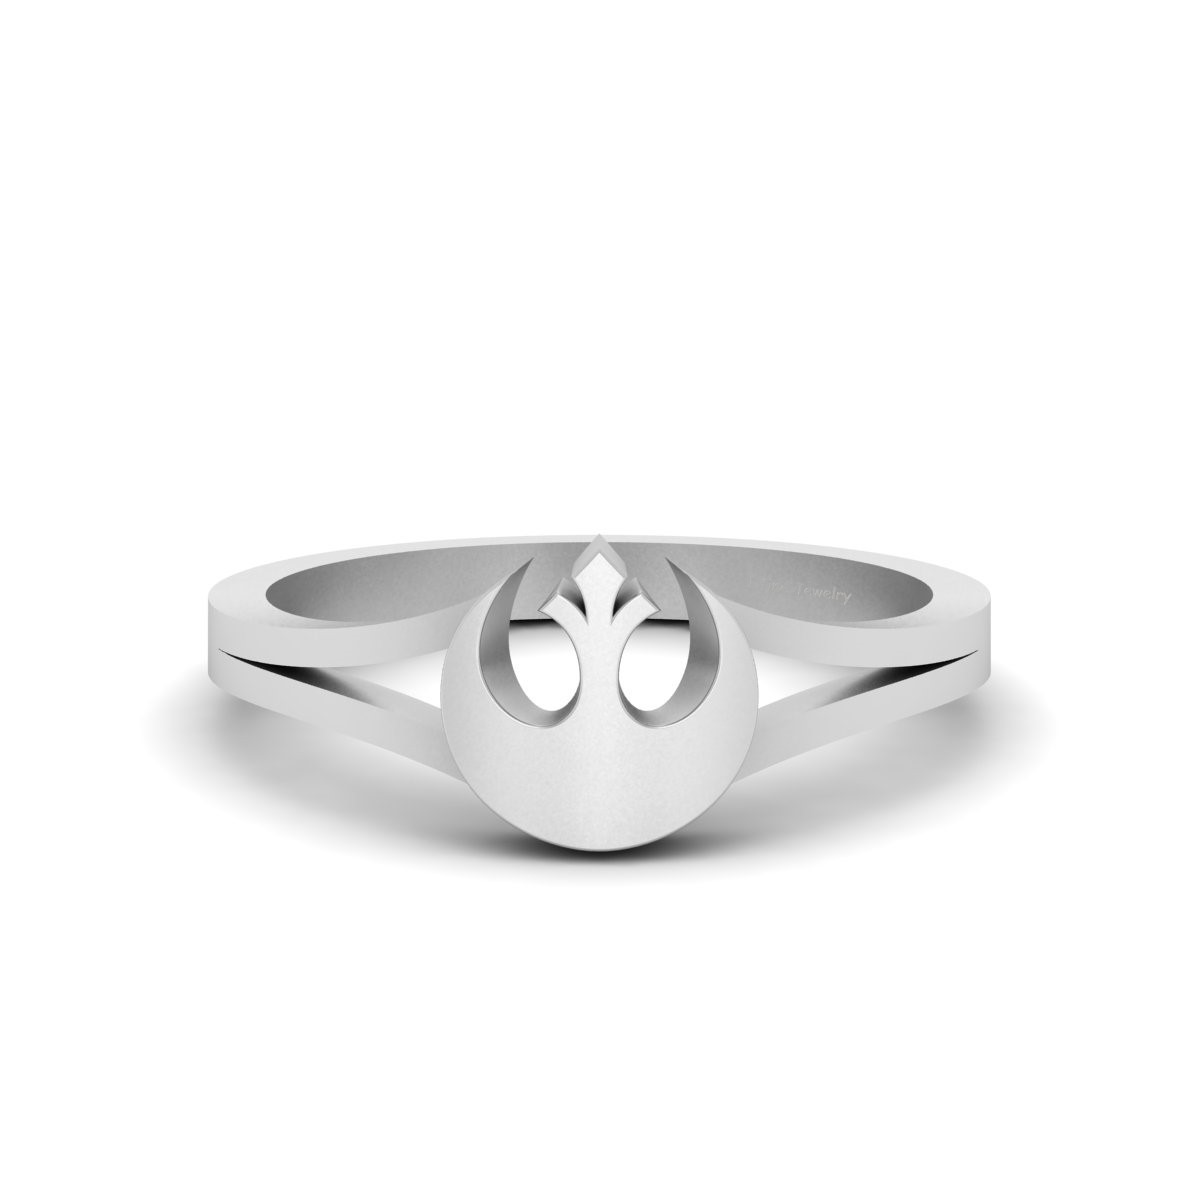 Solid 925 Sterling Silver Rebel Alliance Ring Symbol Of Hope Star Wars Jewelry